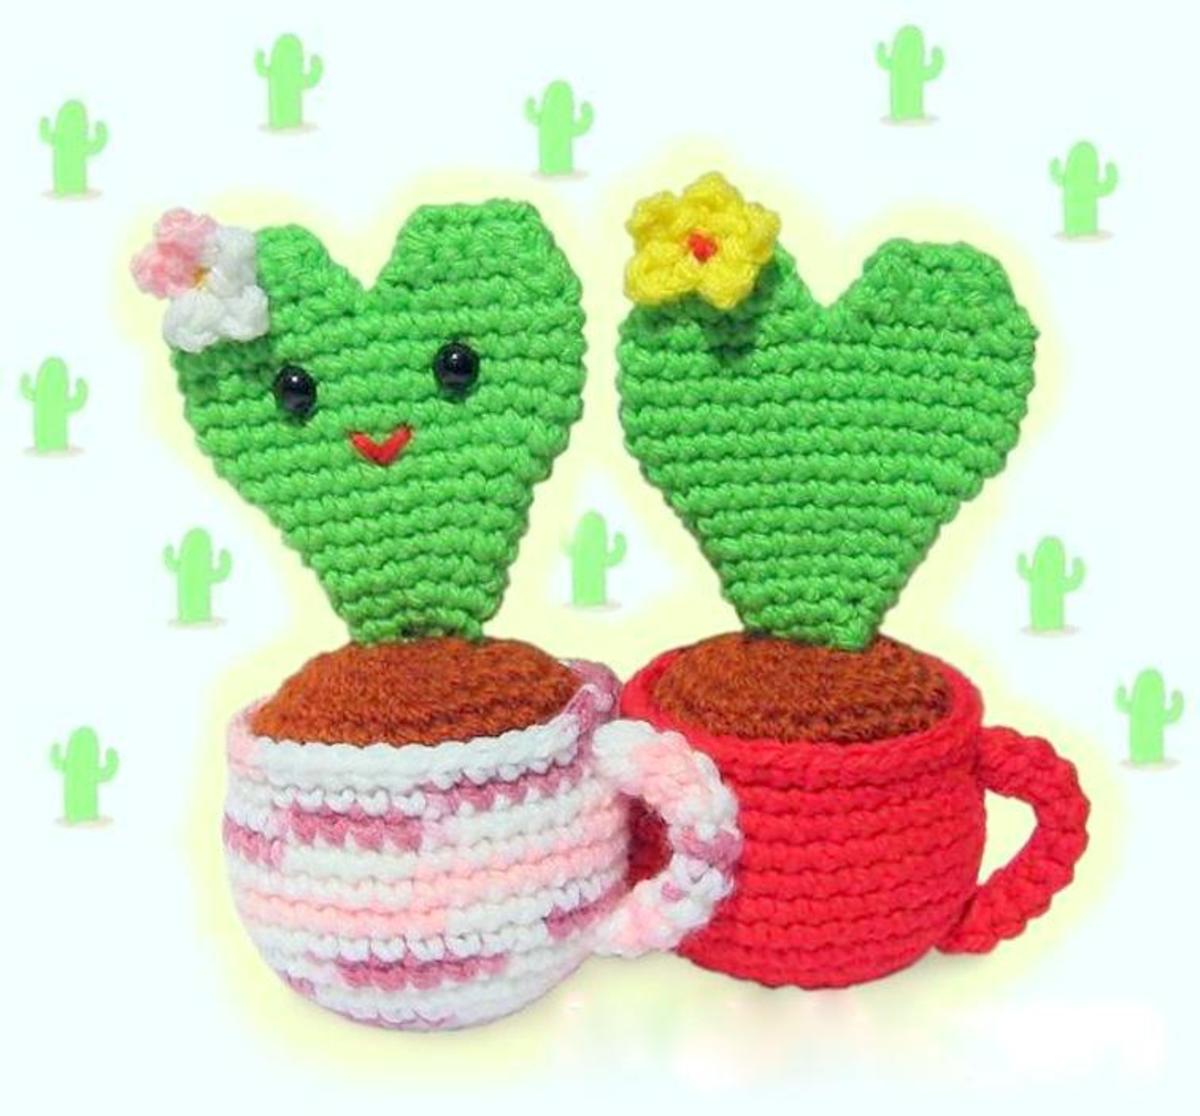 Celebrate the plant lover in your life with these heart-shaped cacti.